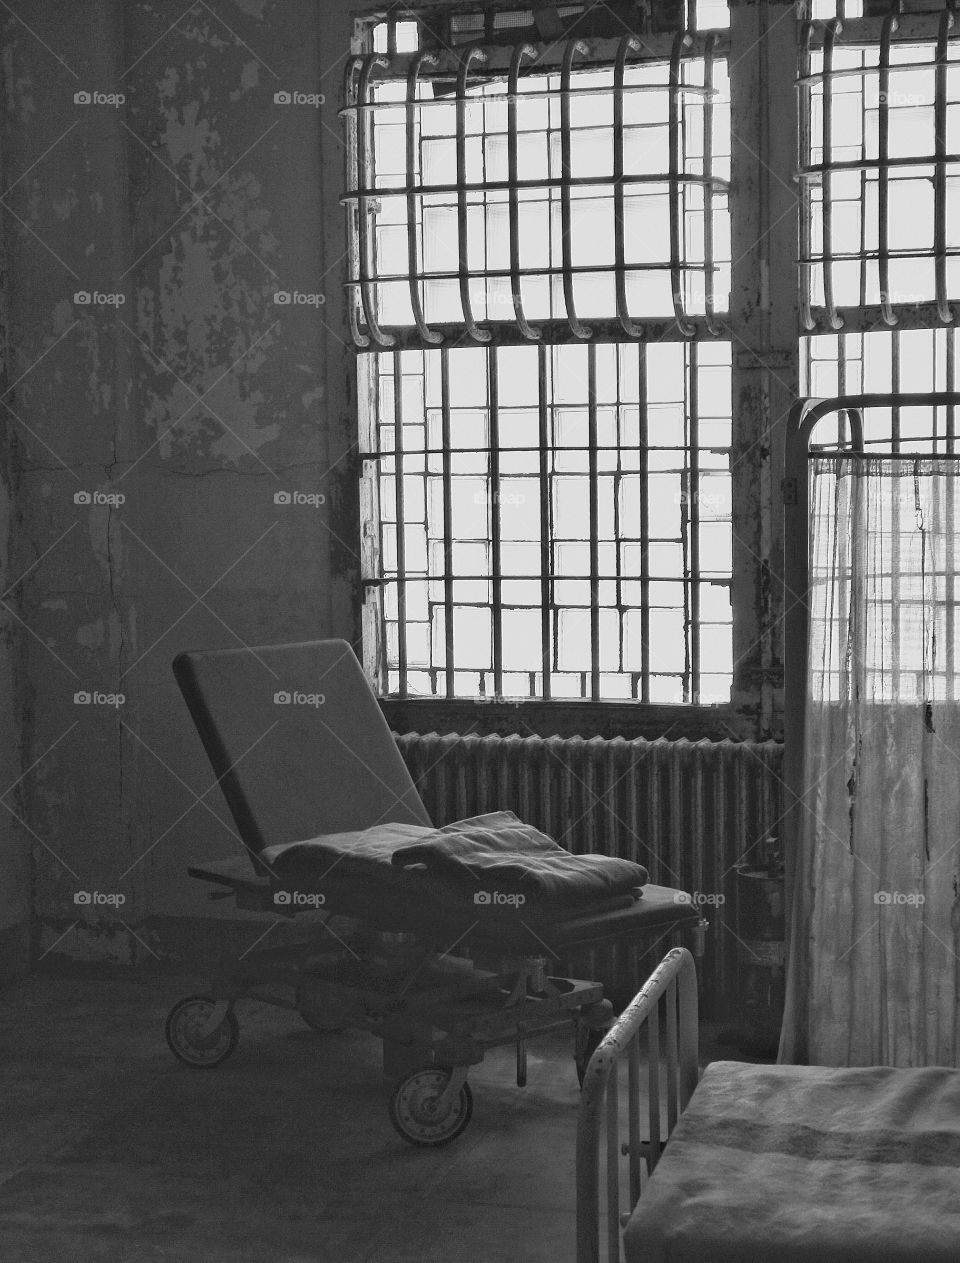 Eerie Room. Spooky Atmospheric Abandoned Ward For The Criminally Insane
